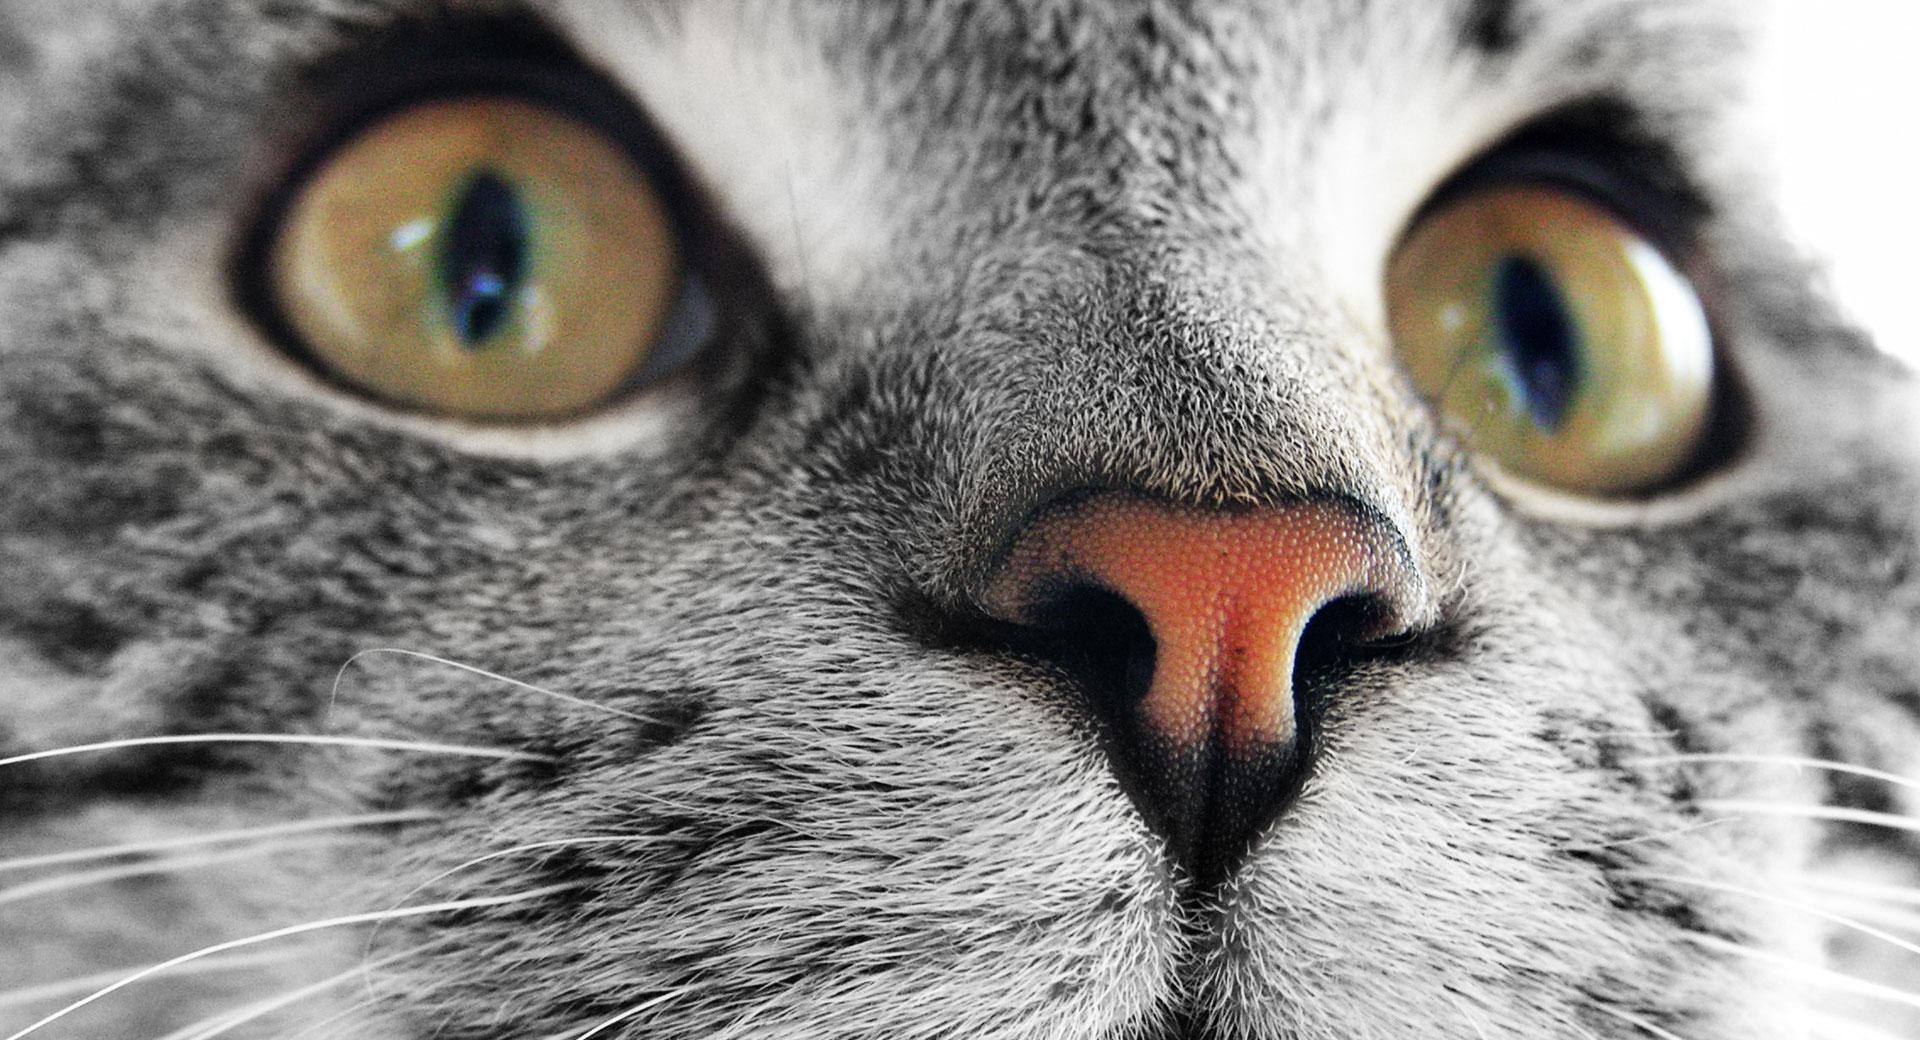 Kitty Cat Close Up wallpapers HD quality